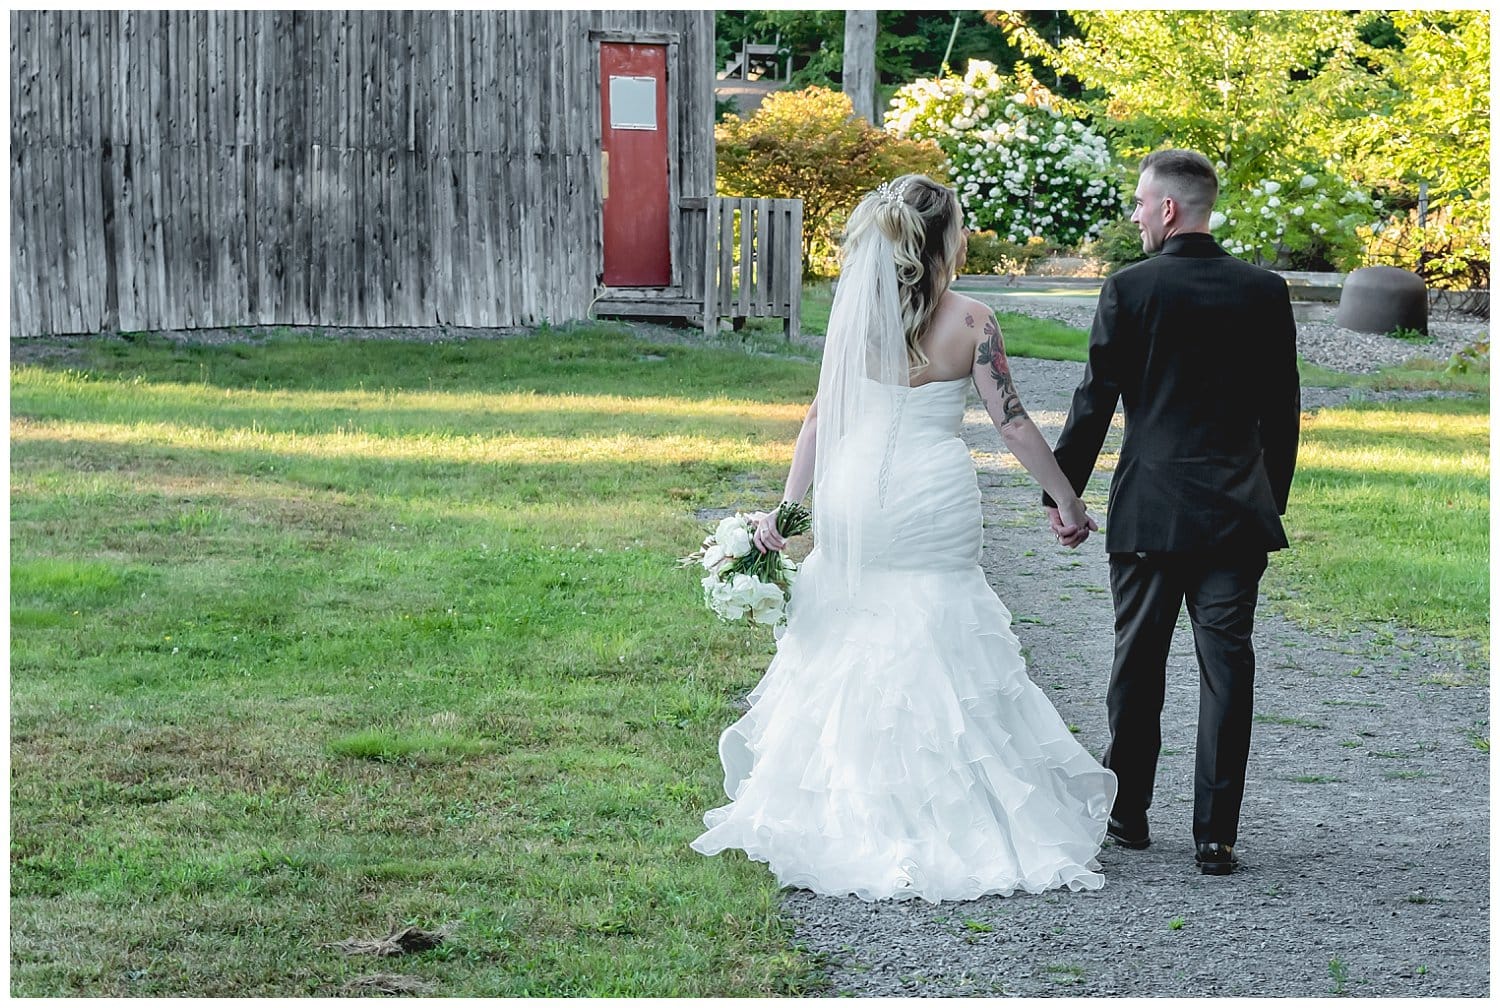 A bride and groom walk hand in hand looking at each other on their way to their wedding reception at Hatfield Farm.